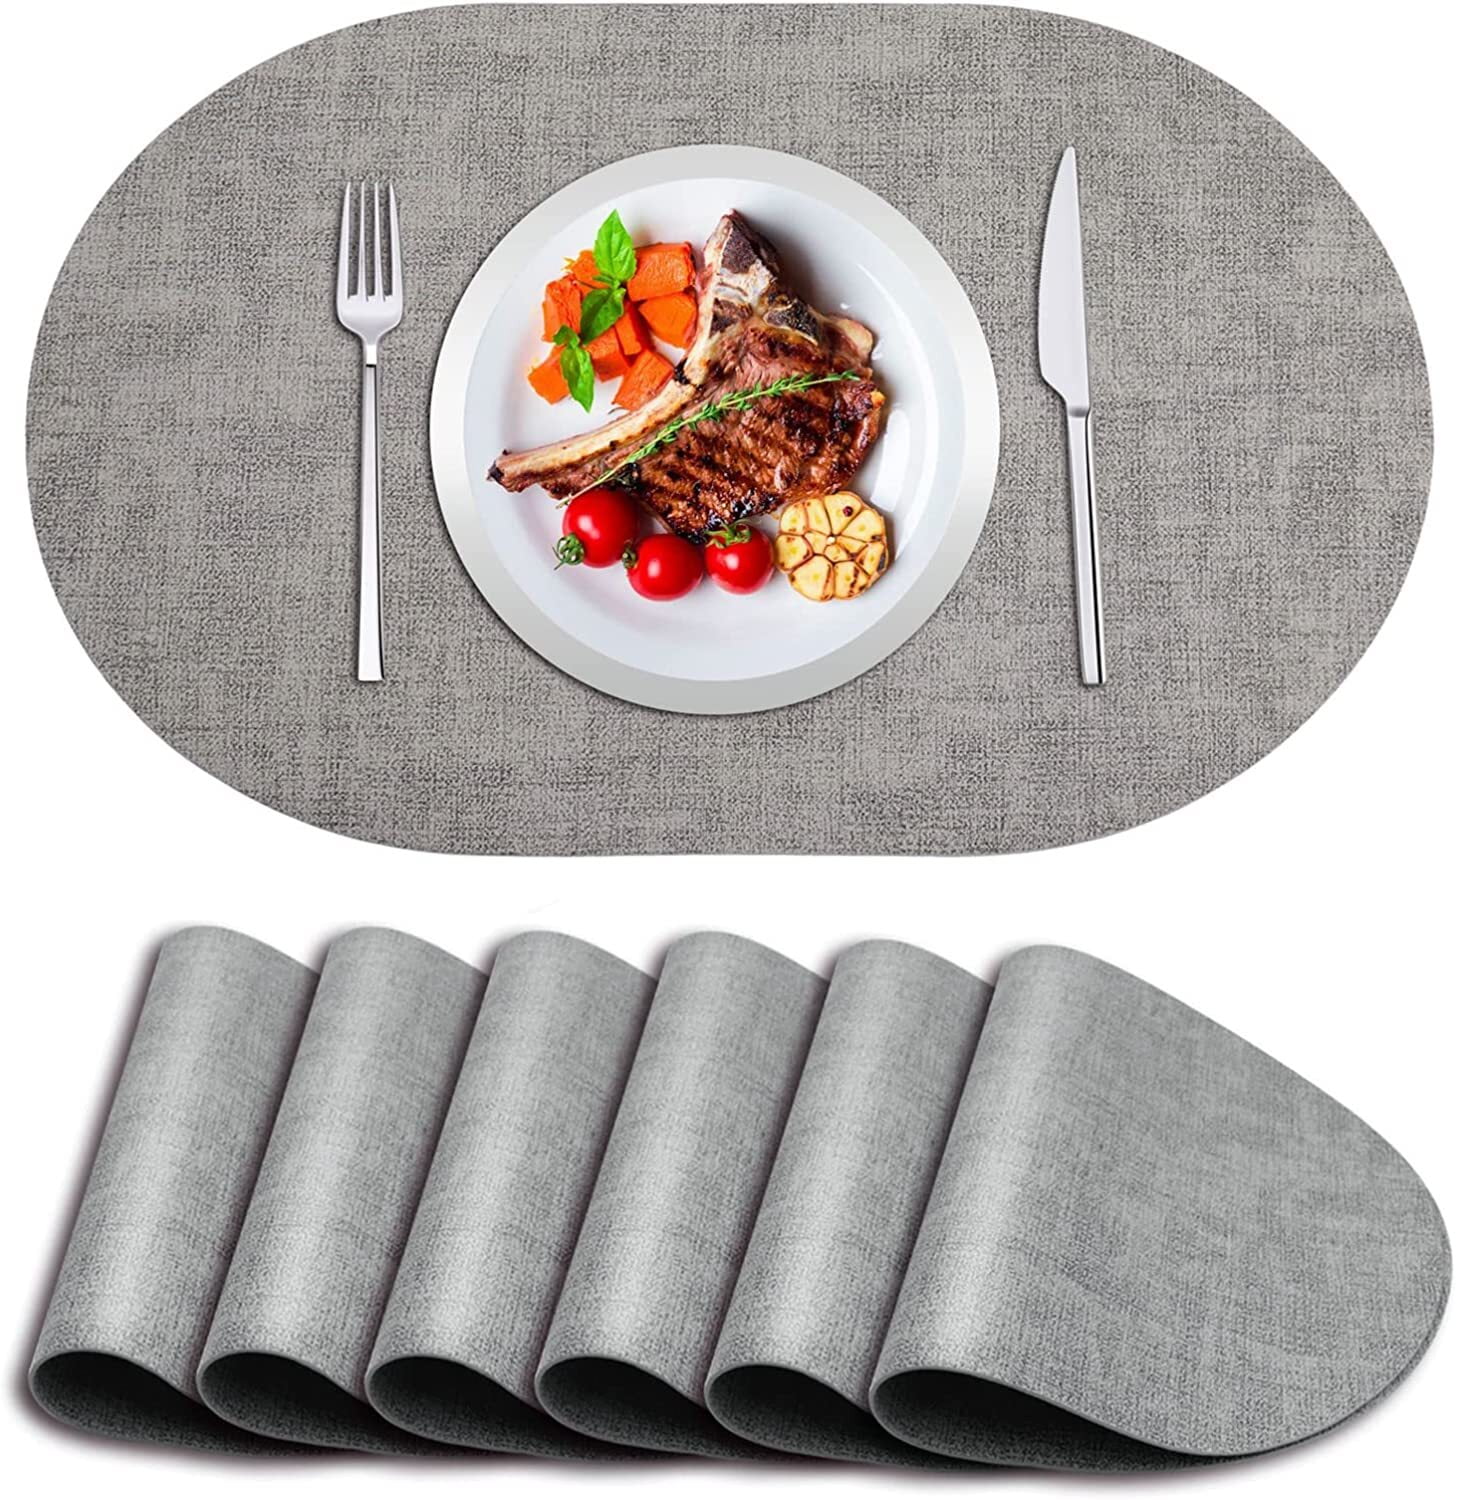 SHACOS Faux Leather Placemats Set of 6 Heat Resistant Place Mats for Dining  Table Non Slip Wipeable Table Mats for Kitchen Coffee Table Indoor Outdoor